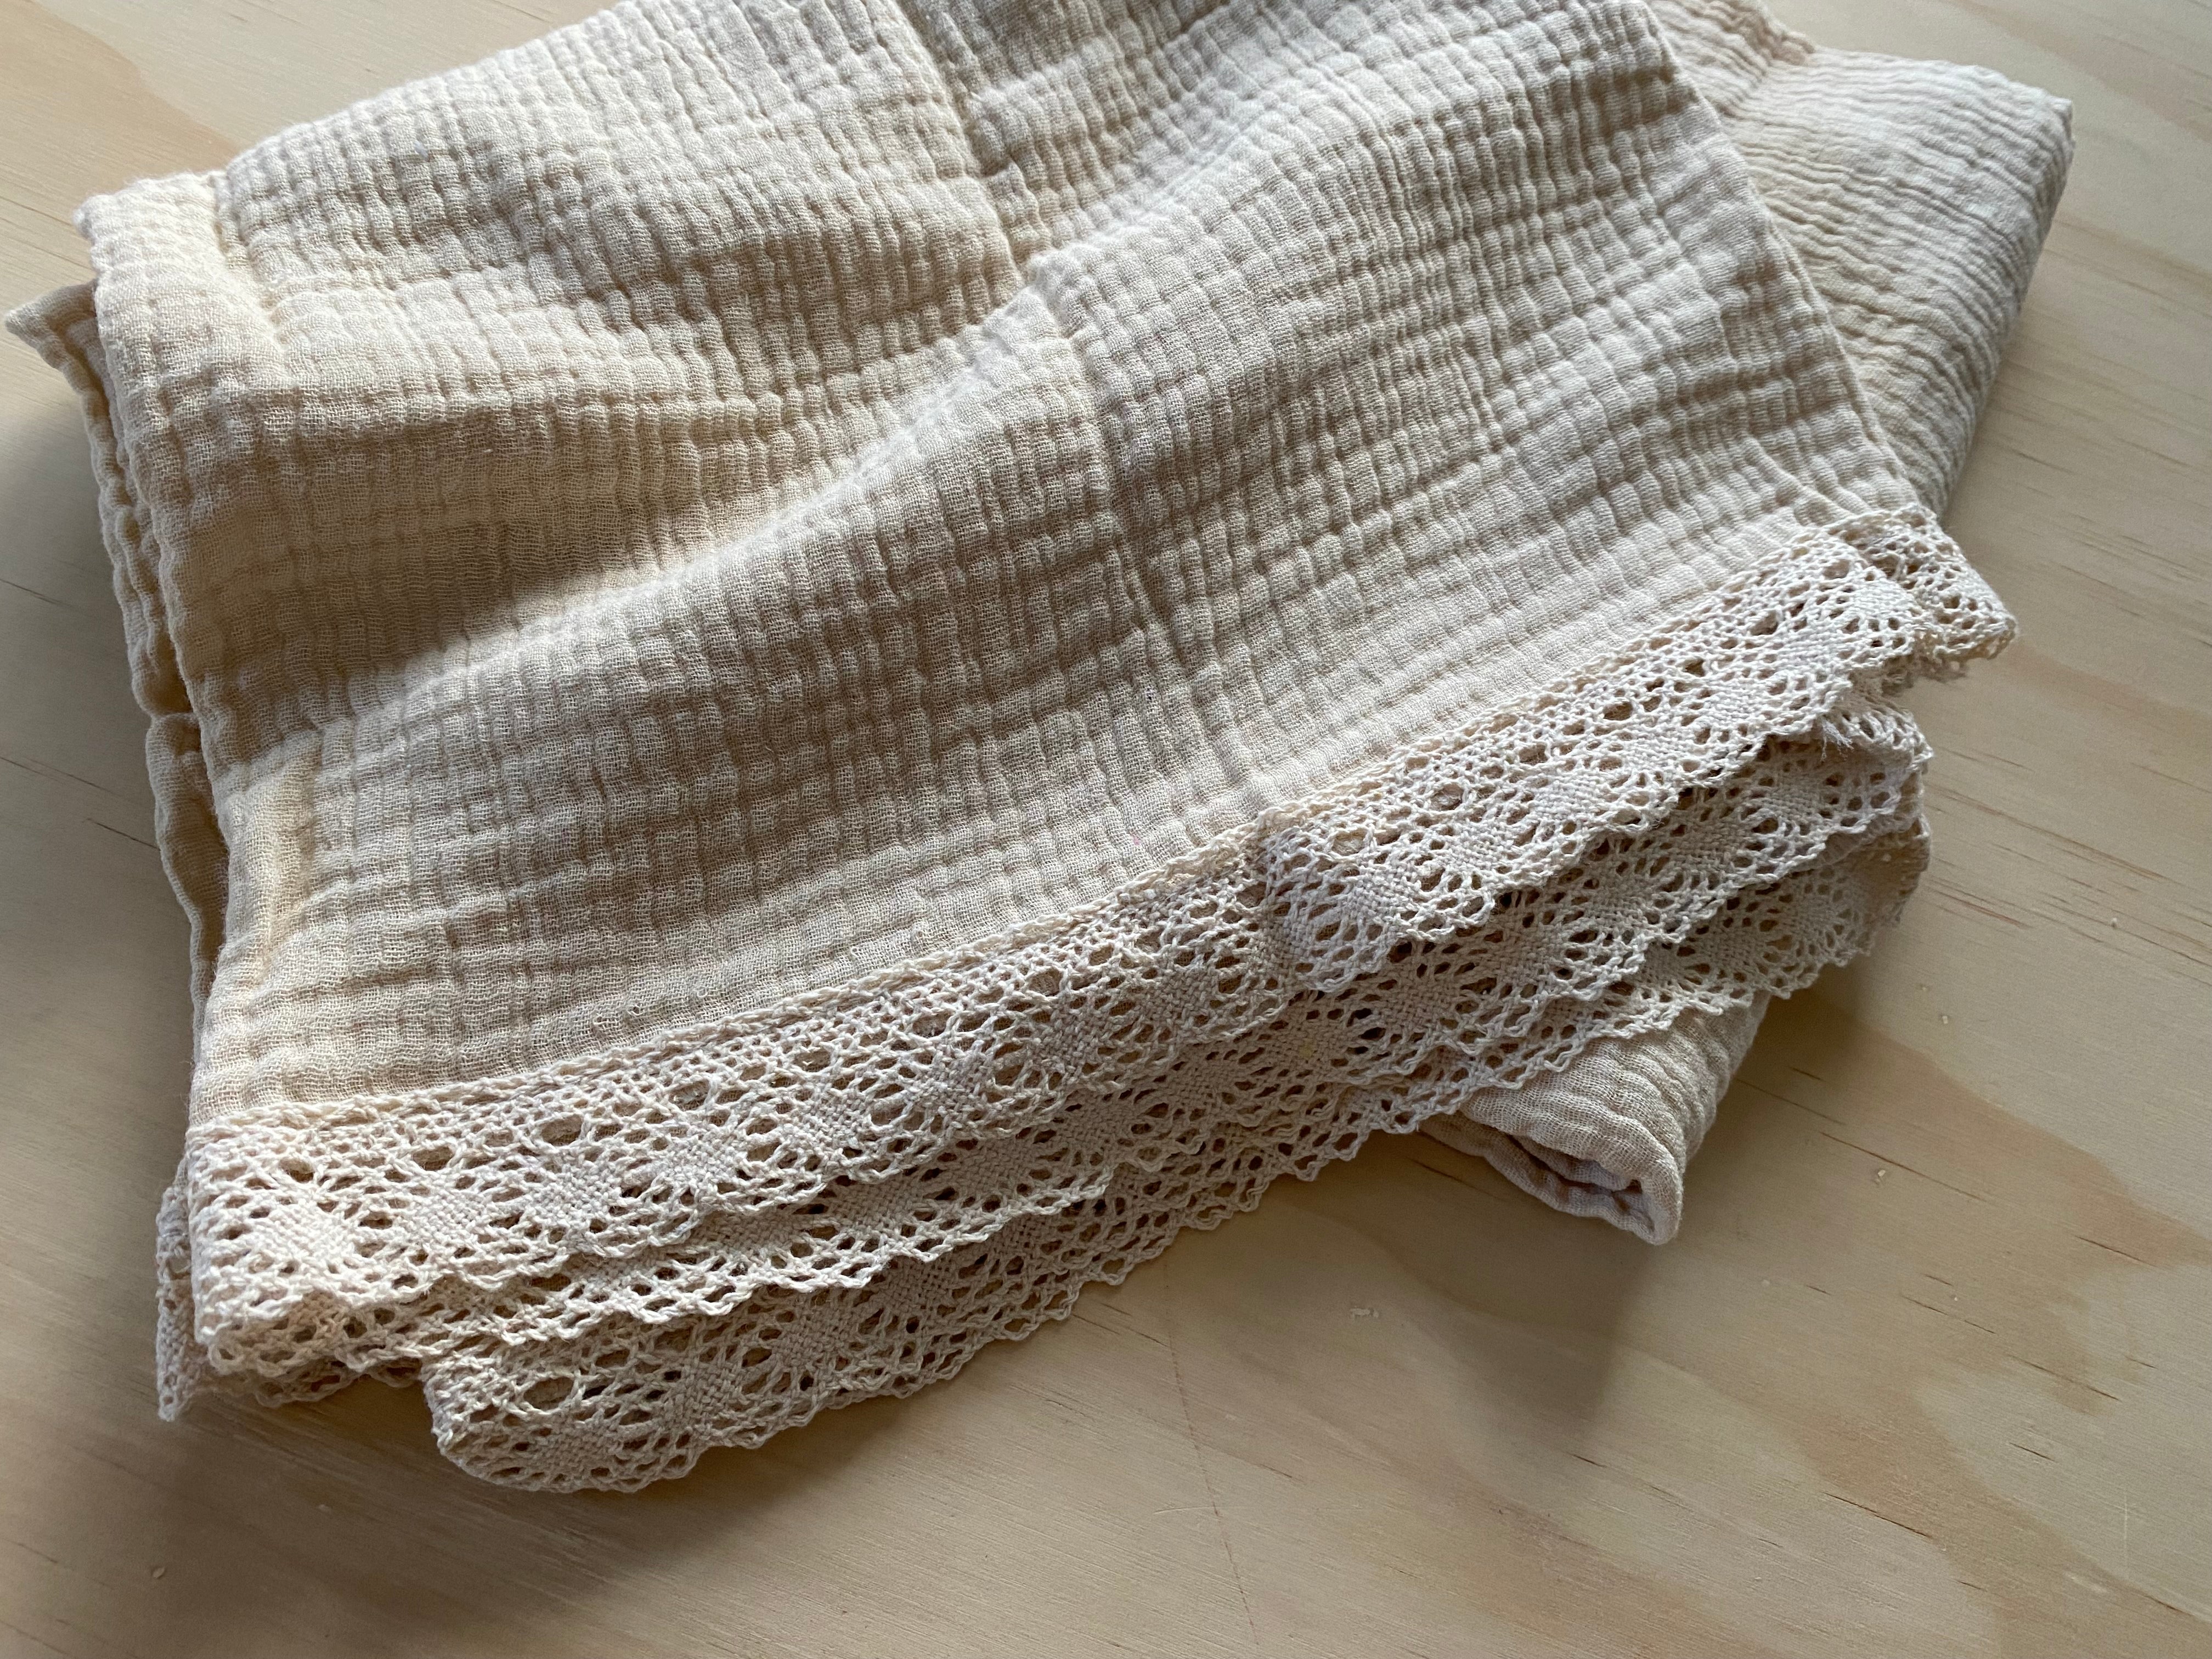 Sand Lace Blanket